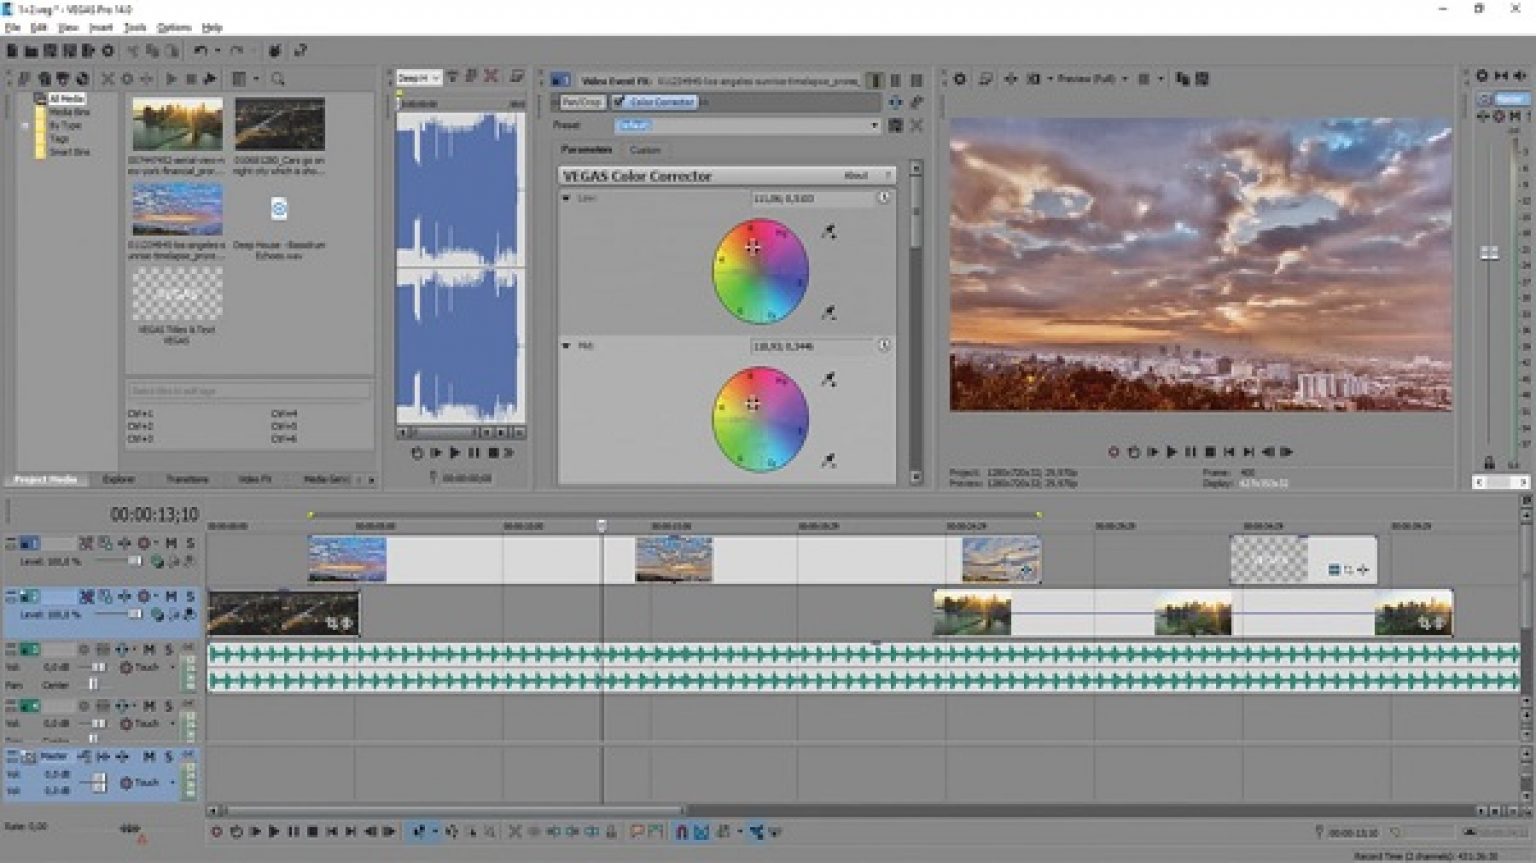 how to create a dvd with chapters and dolby premiere pro